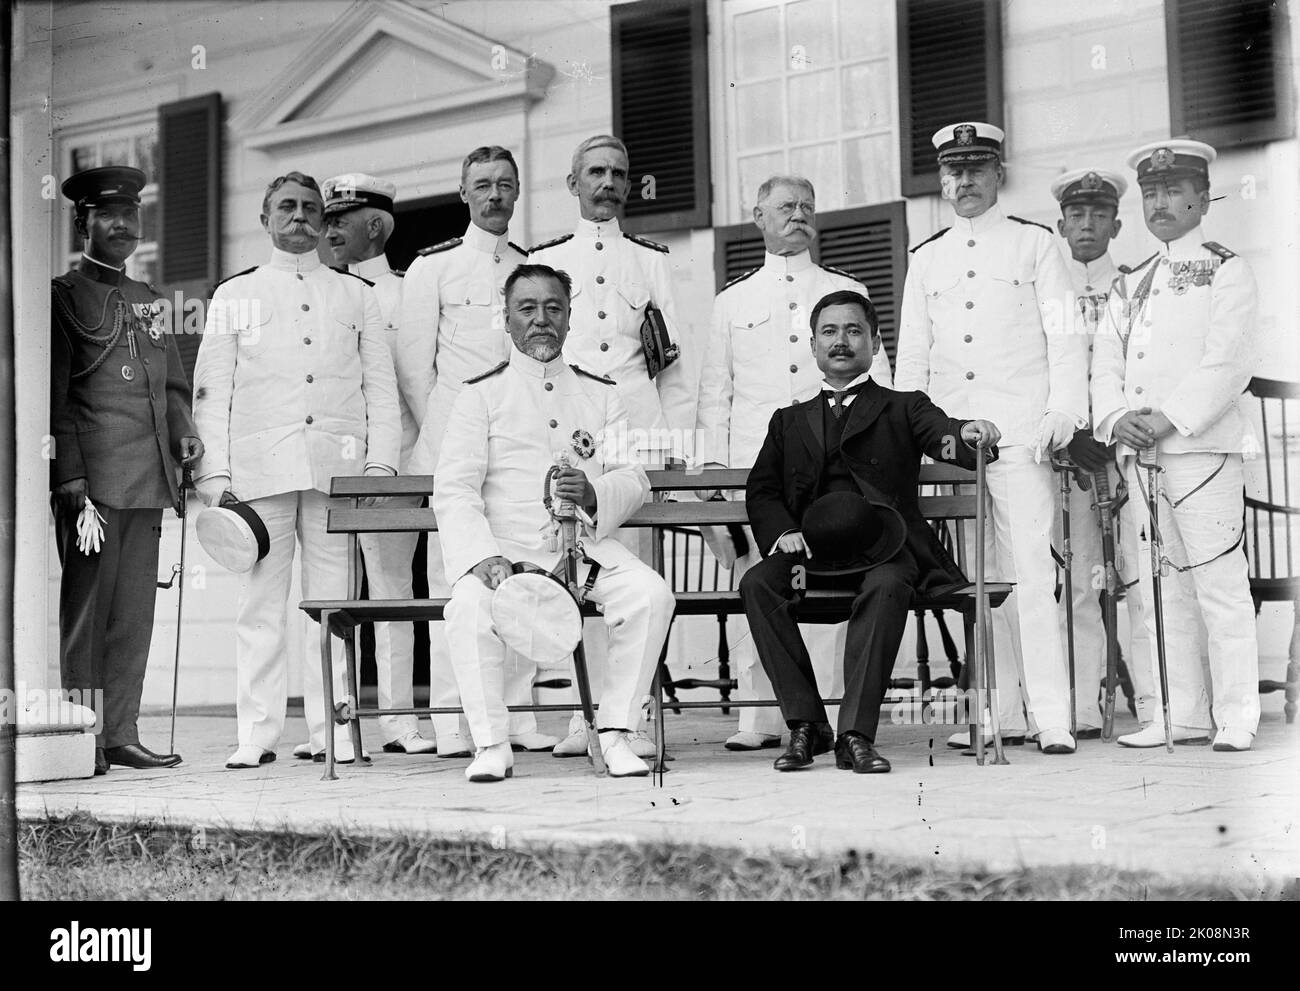 Marshal-Admiral the Marquis Togo Heihachiro with US naval officers in Washington, D.C., 1911. Rear Admiral, U.S.A. Brownson, Willard Herbert; Potter, William Parker; Raby, James J. [Togo was admiral of the fleet in the Imperial Japanese Navy. Rear Admiral Willard H. Brownson fought pirates in Mexico, served in the Spanish-American War, also served a term as Superintendent of the United States Naval Academy. Rear Admiral William P. Potter served as Chief of the Bureau of Navigation. Rear Admiral James Joseph Raby took out the first merchant convoy under American escort During World War I]. Stock Photo